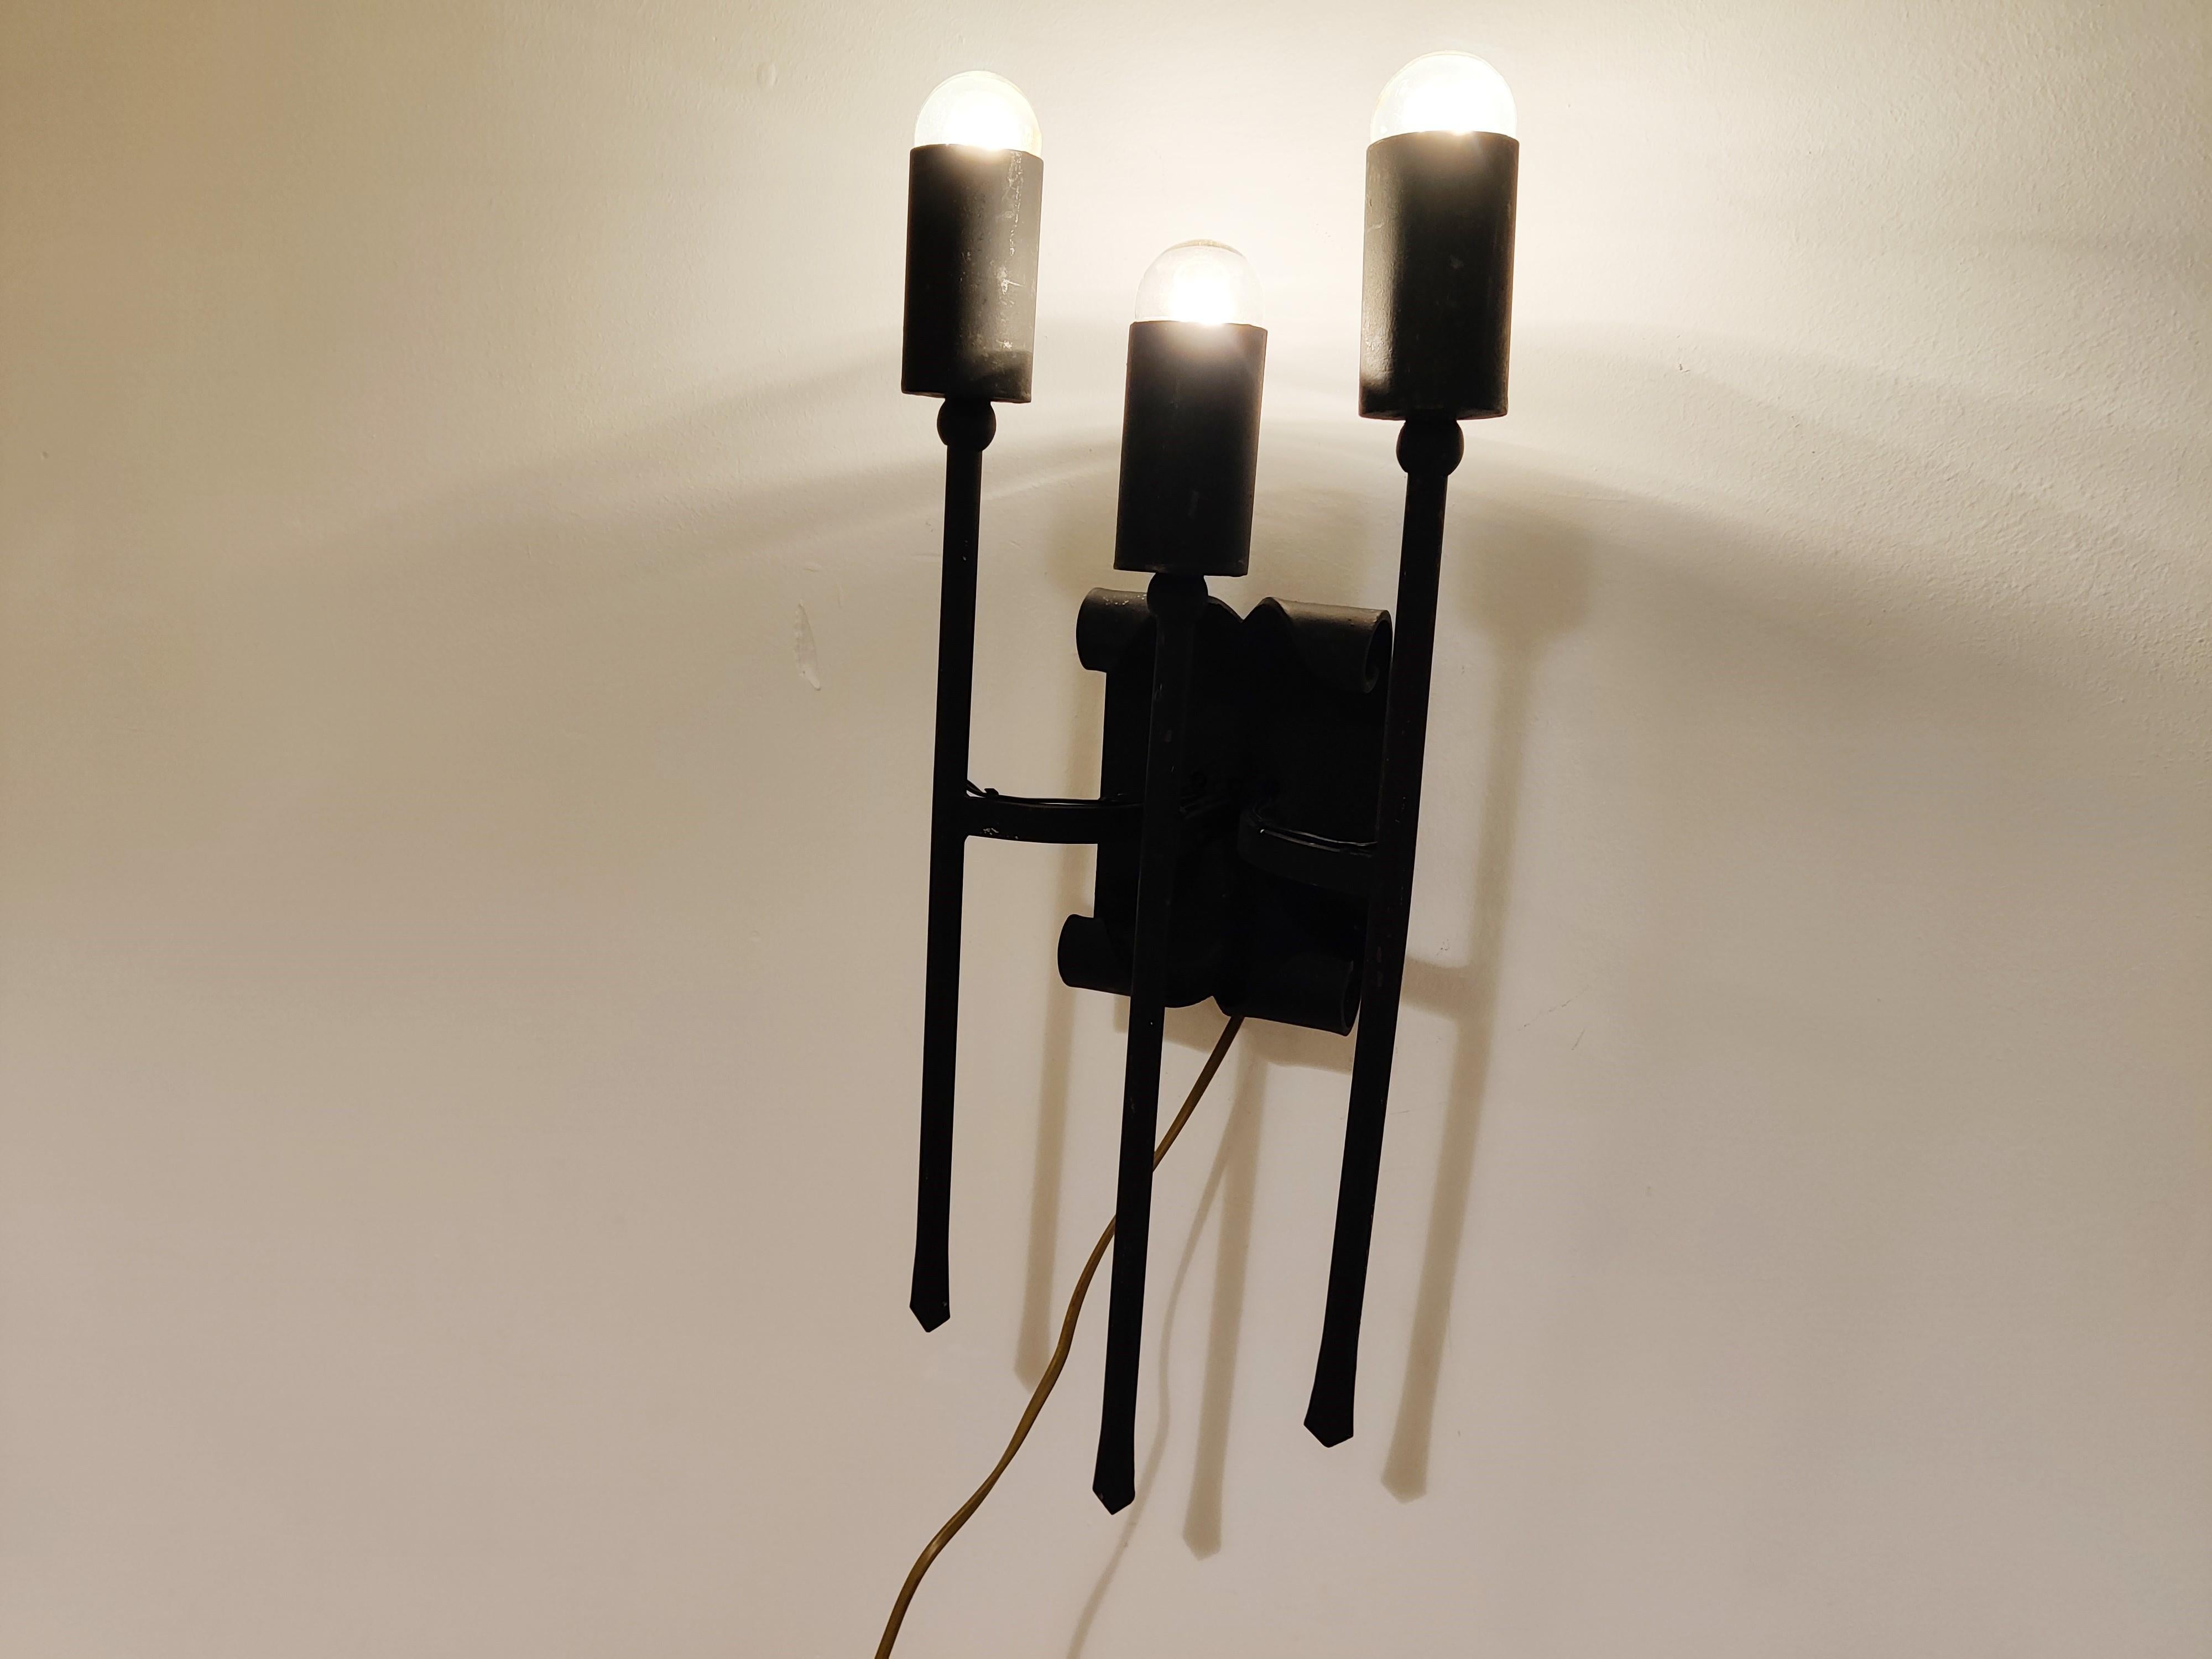 Pair of Spanish Brutalist torch wall lamps.

Each lamp has three E26/E27 lightpoints.

1960s - Belgium

Tested and ready to use

Dimensions:
Height: 53cm/20.86